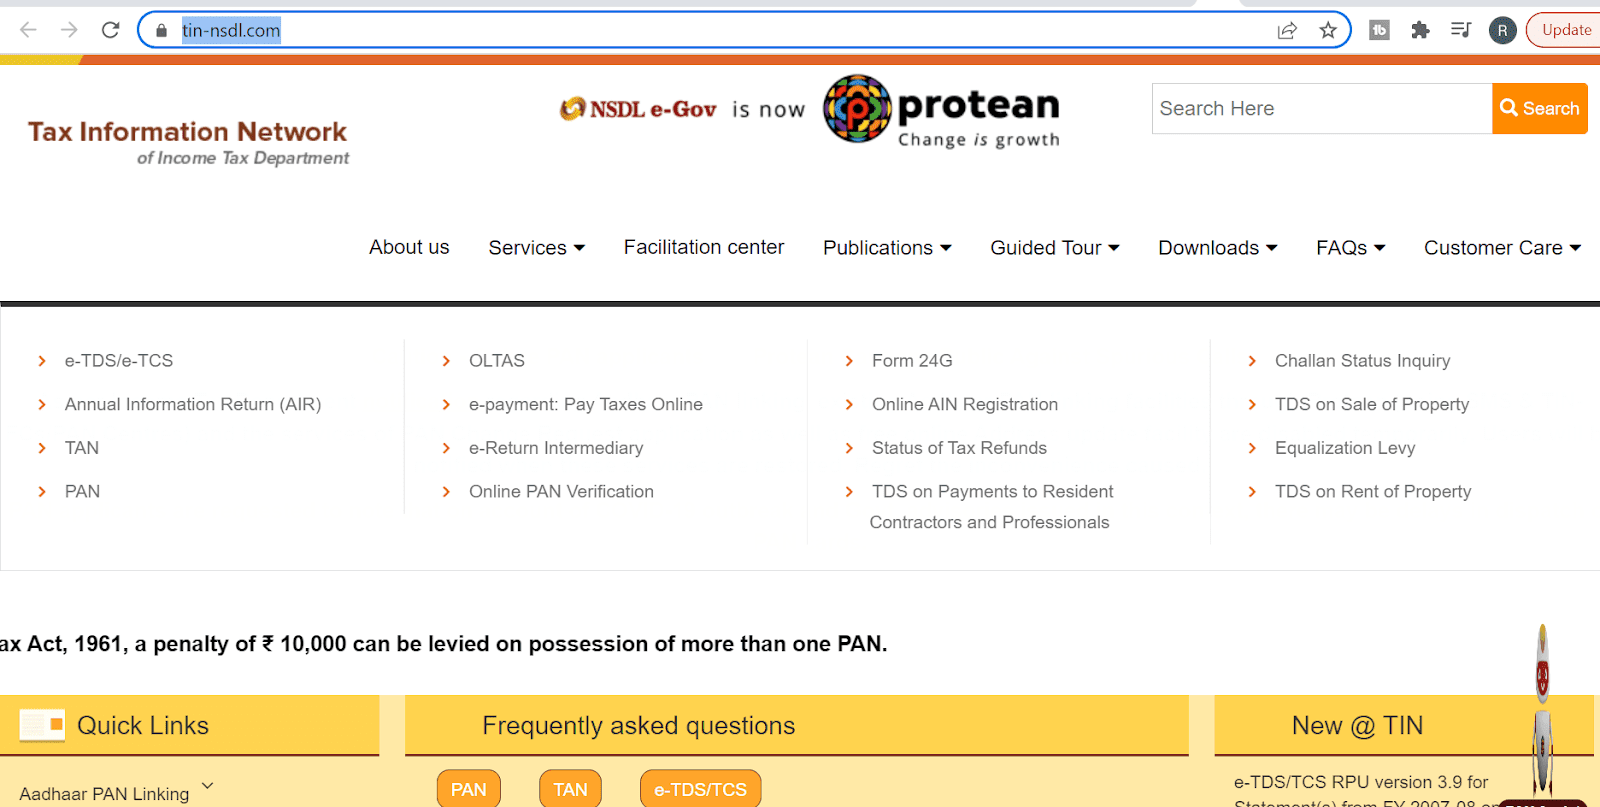 Go to the Protean (formerly NSDL) website